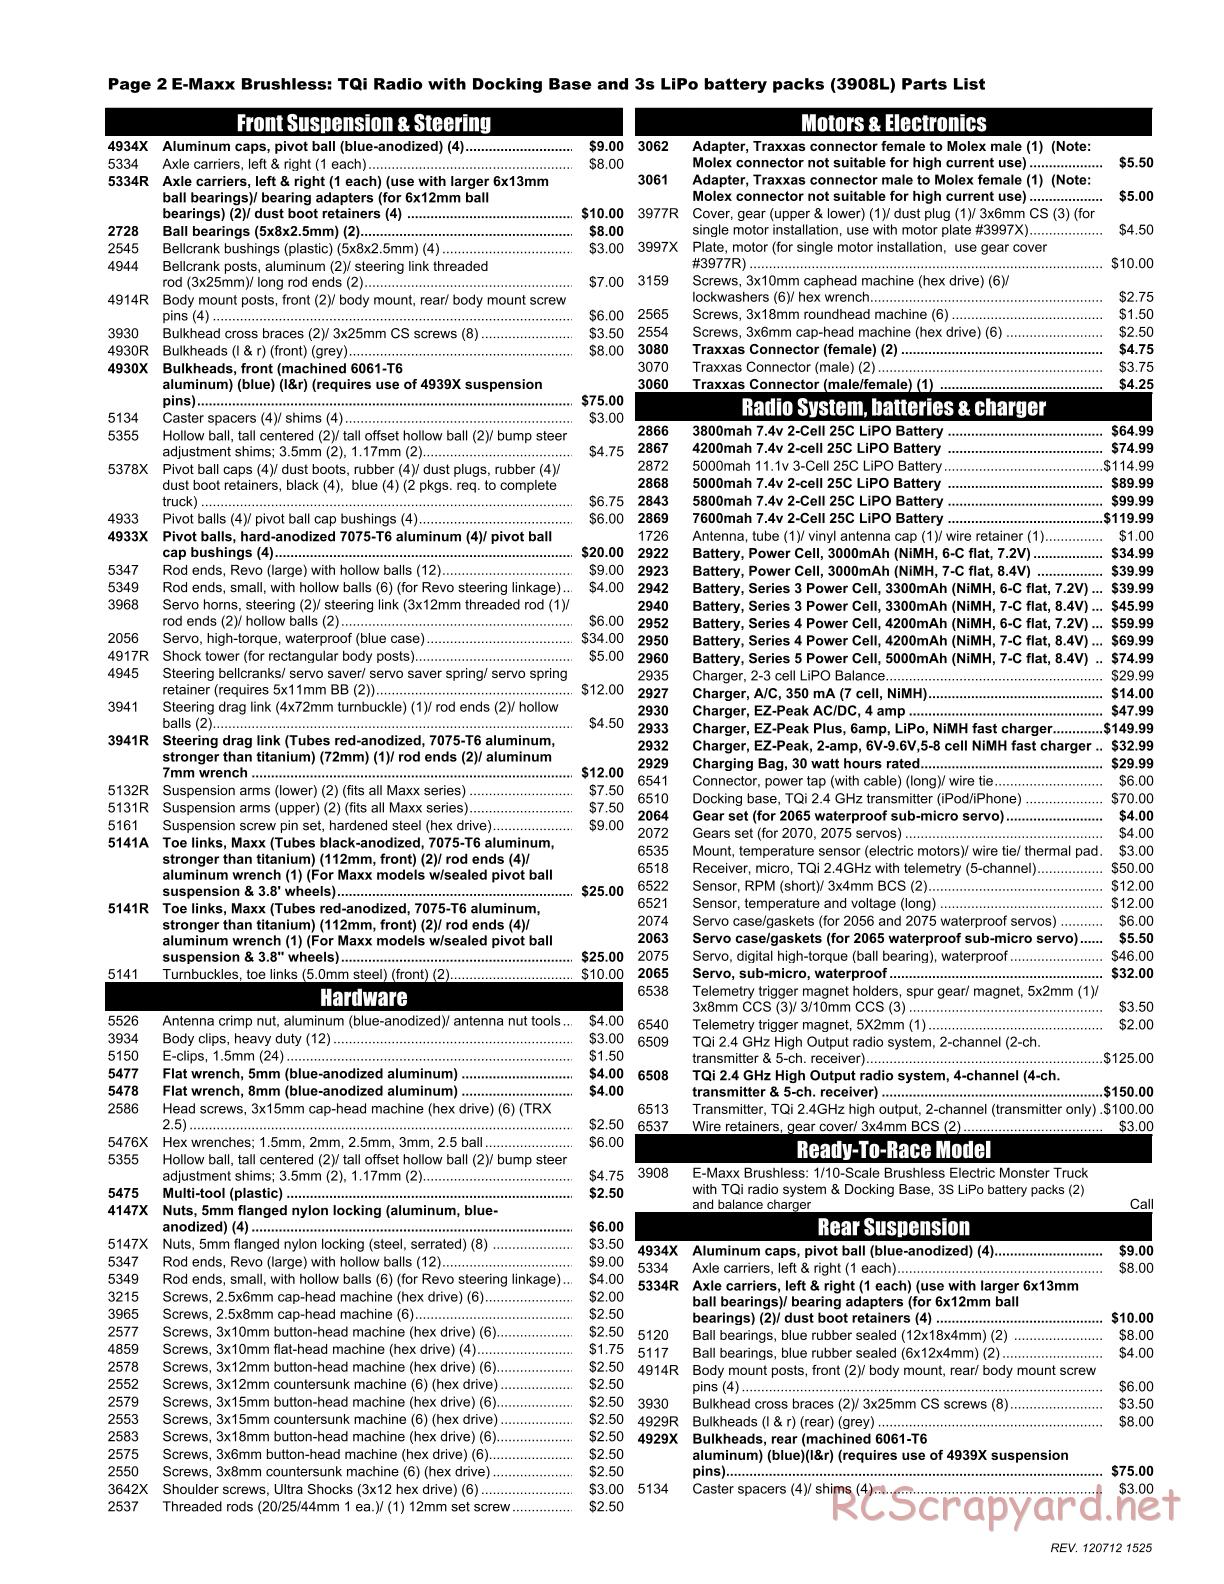 Traxxas - E-Maxx Brushless - Parts List - Page 2